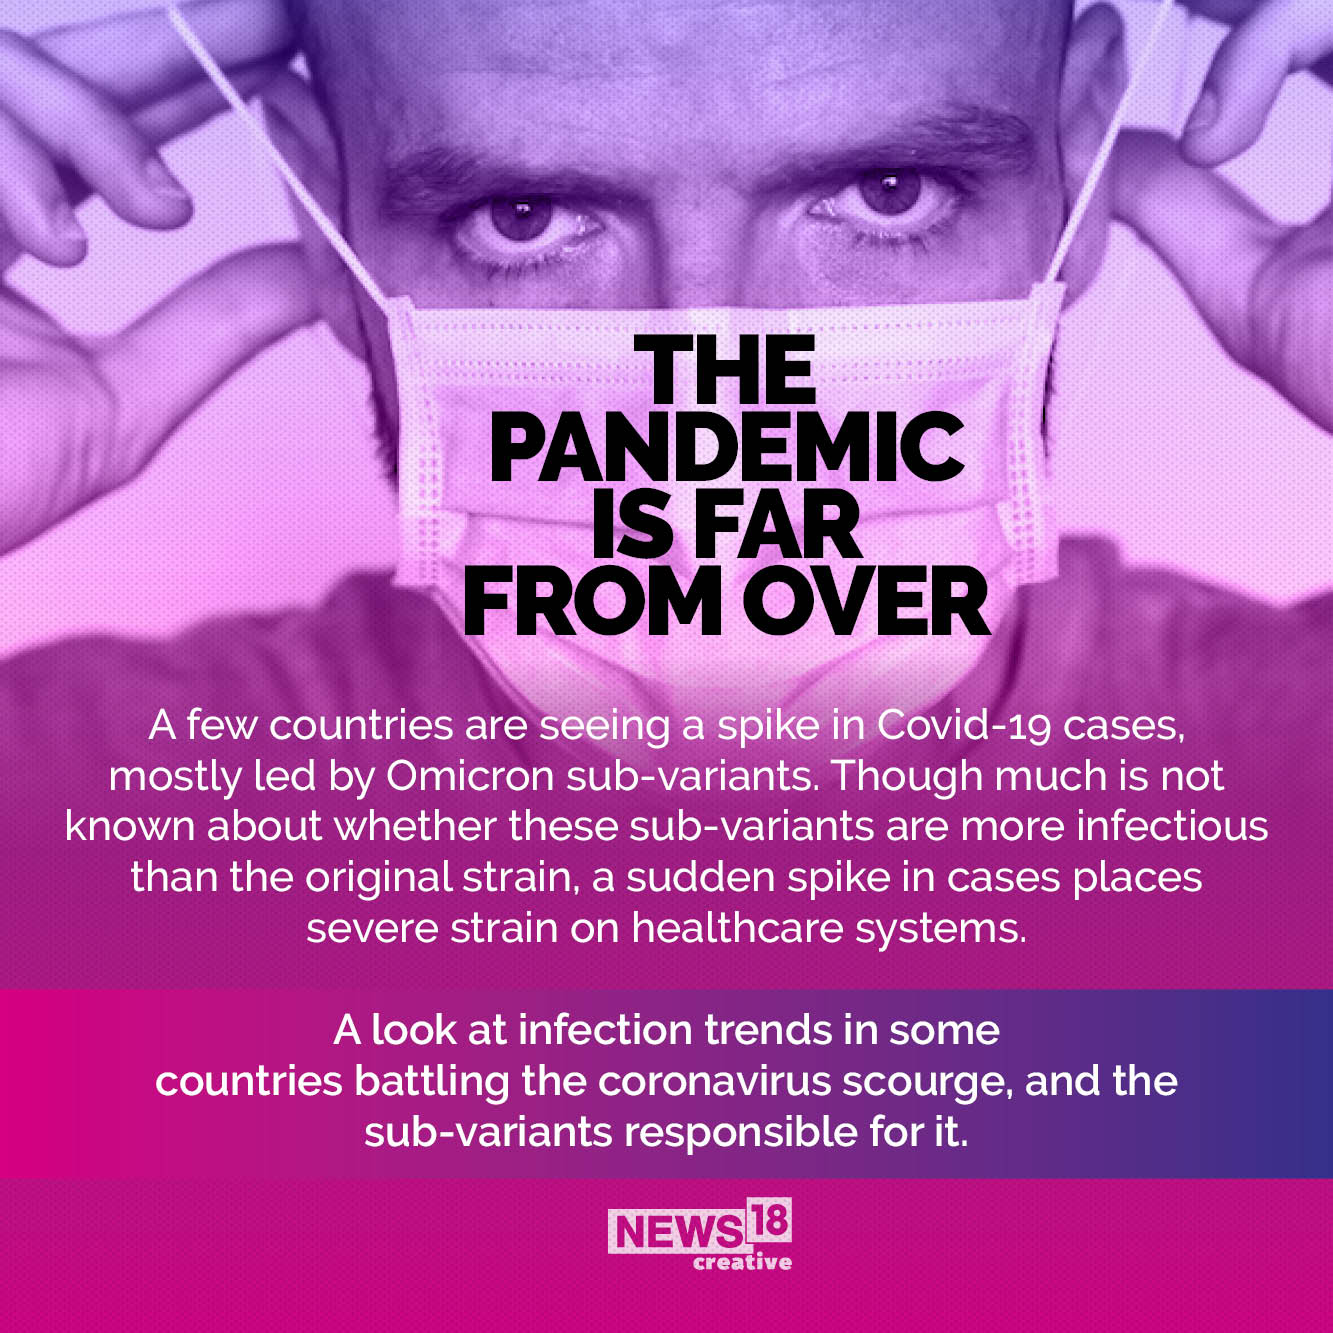 Why the pandemic is far from over